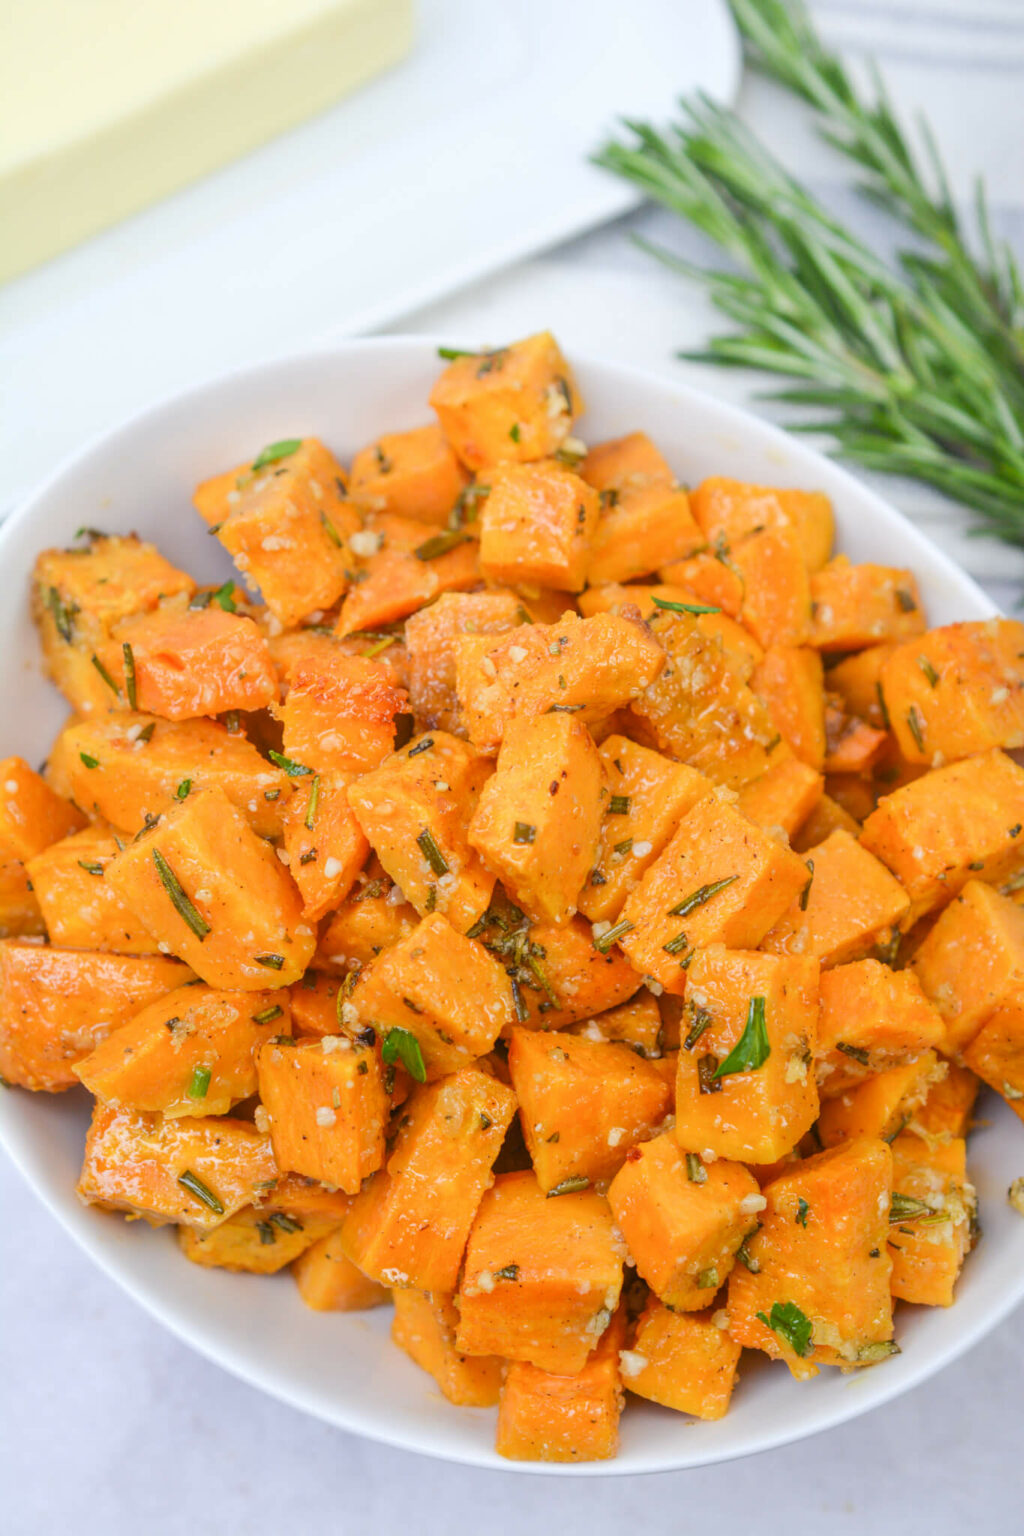 Savory Roasted Sweet Potatoes with Rosemary